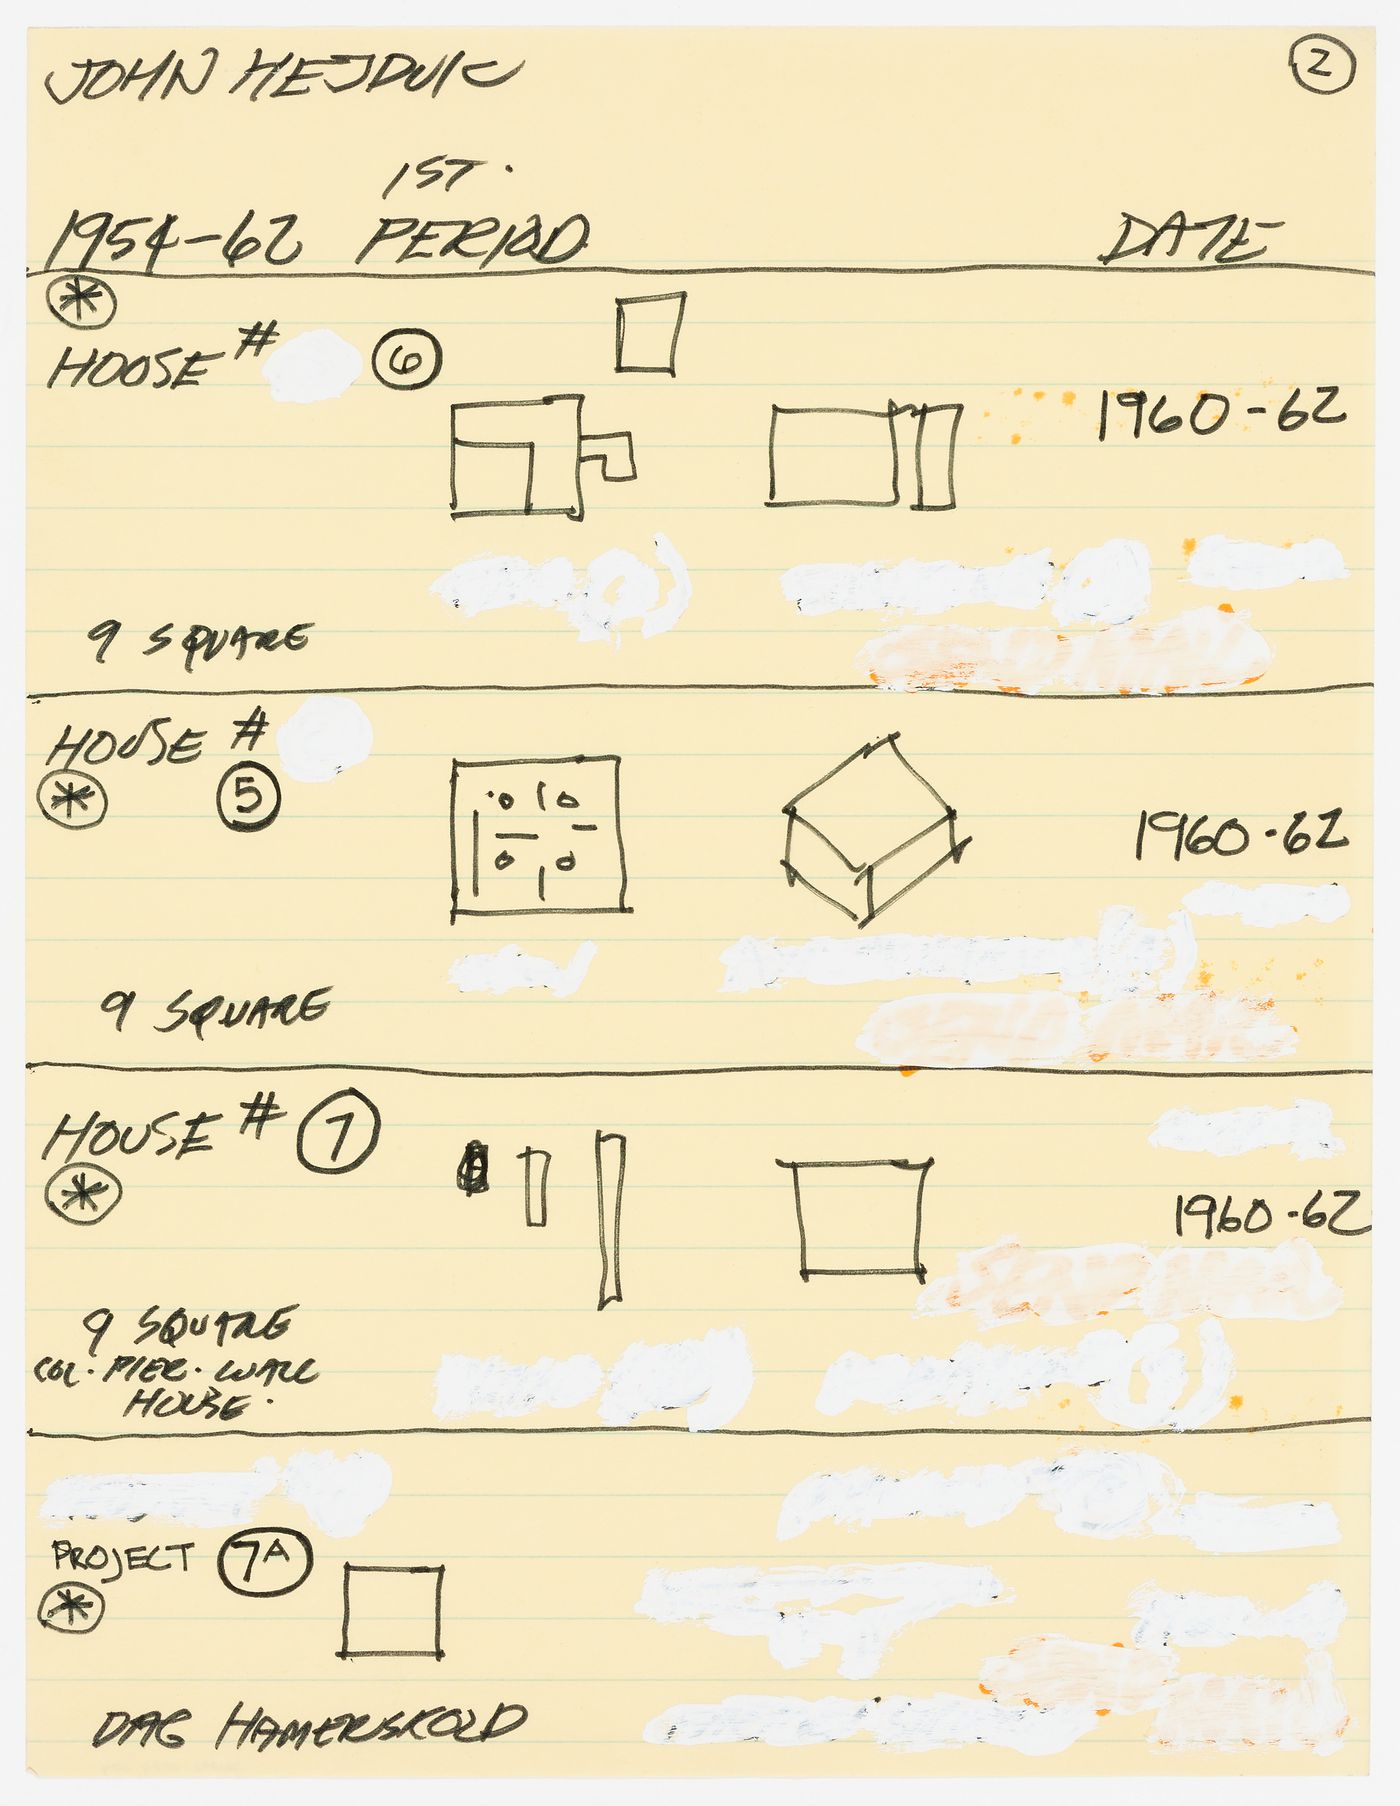 List of projects by John Hejduk. Sheet 2: 1954-1962 (1st period): House #5, House #6, House #7 and Project 7A